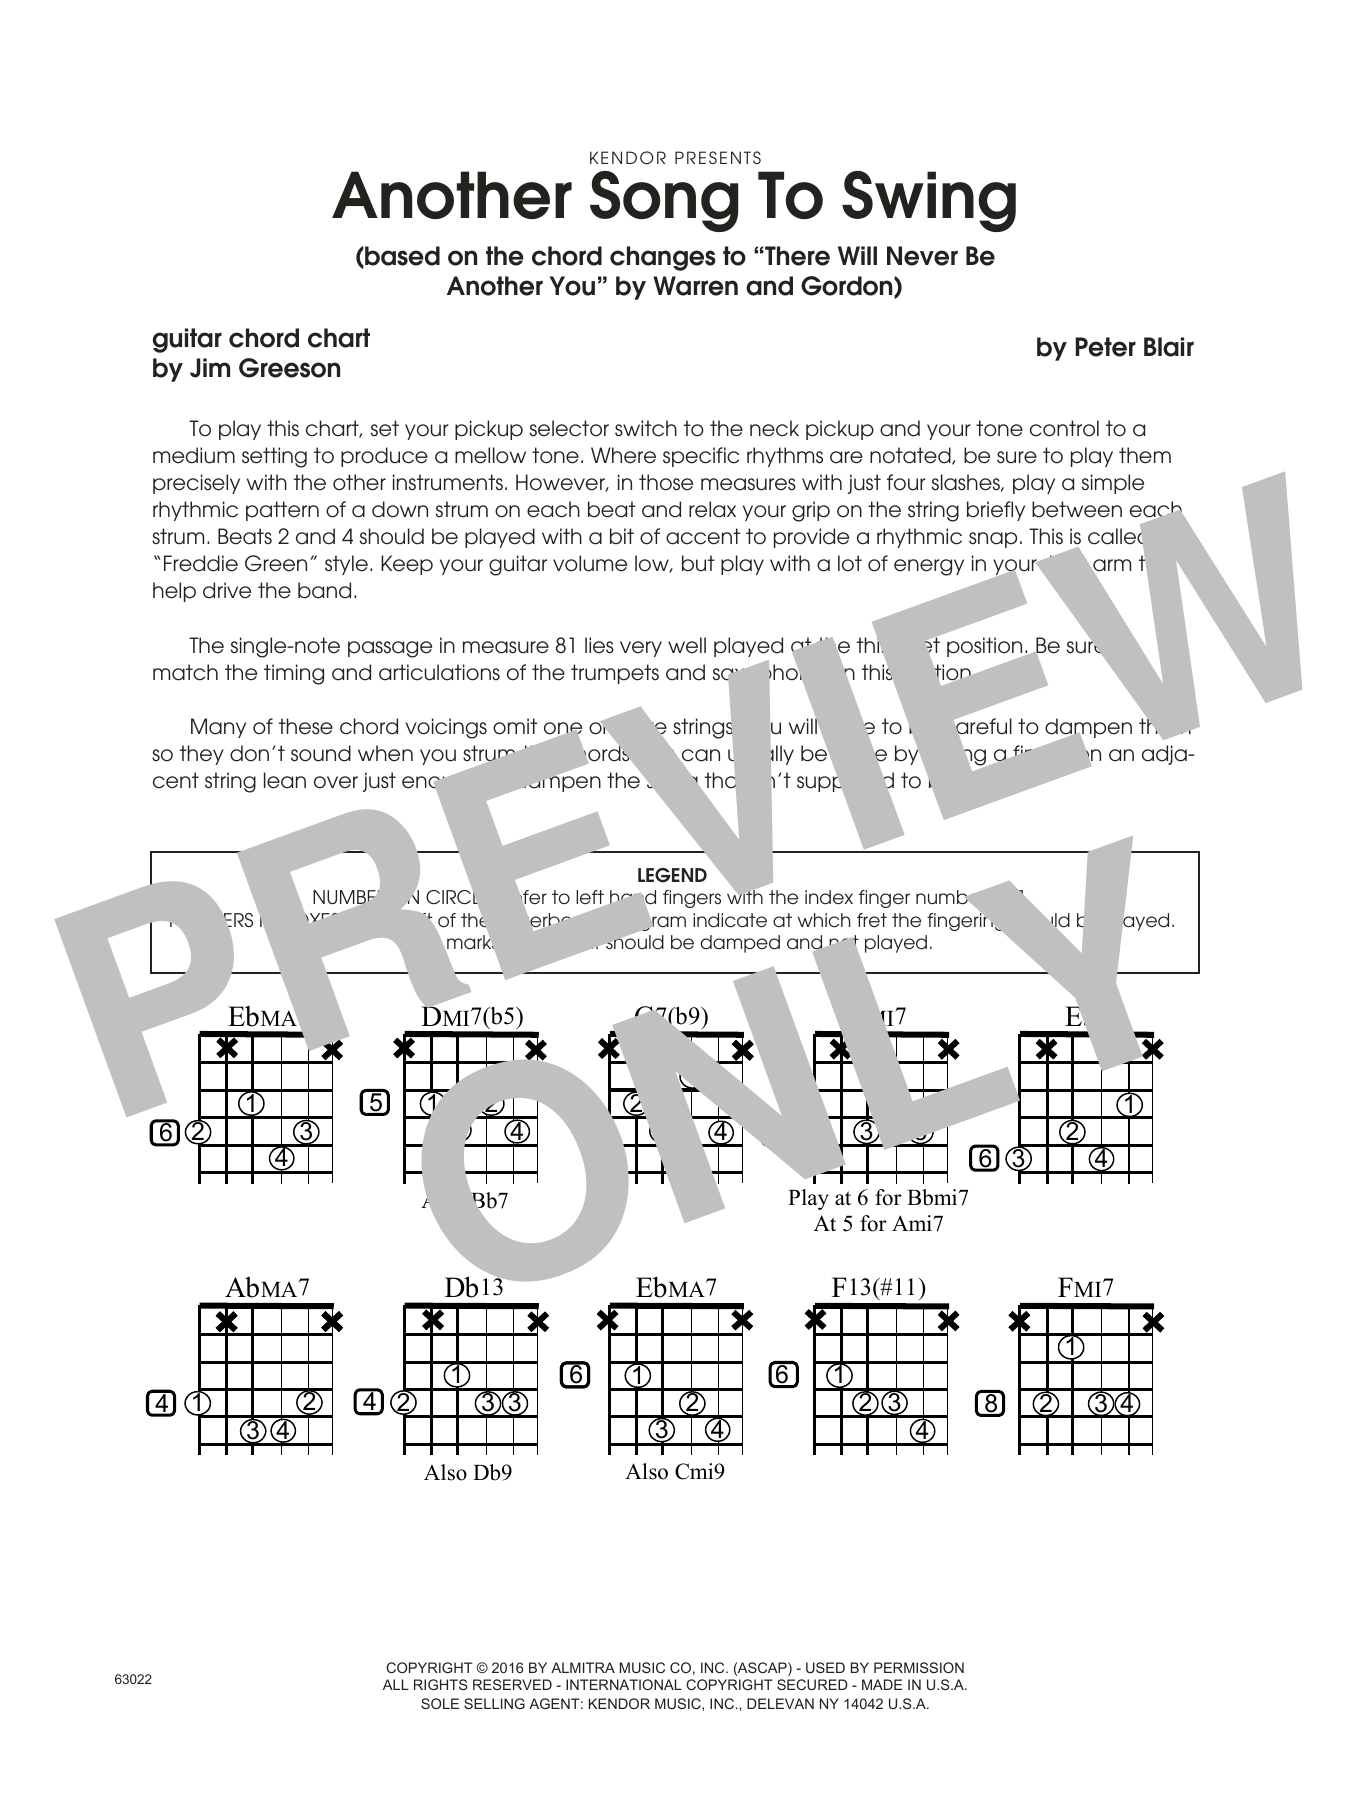 Download Peter Blair Another Song To Swing - Guitar Chord Ch Sheet Music